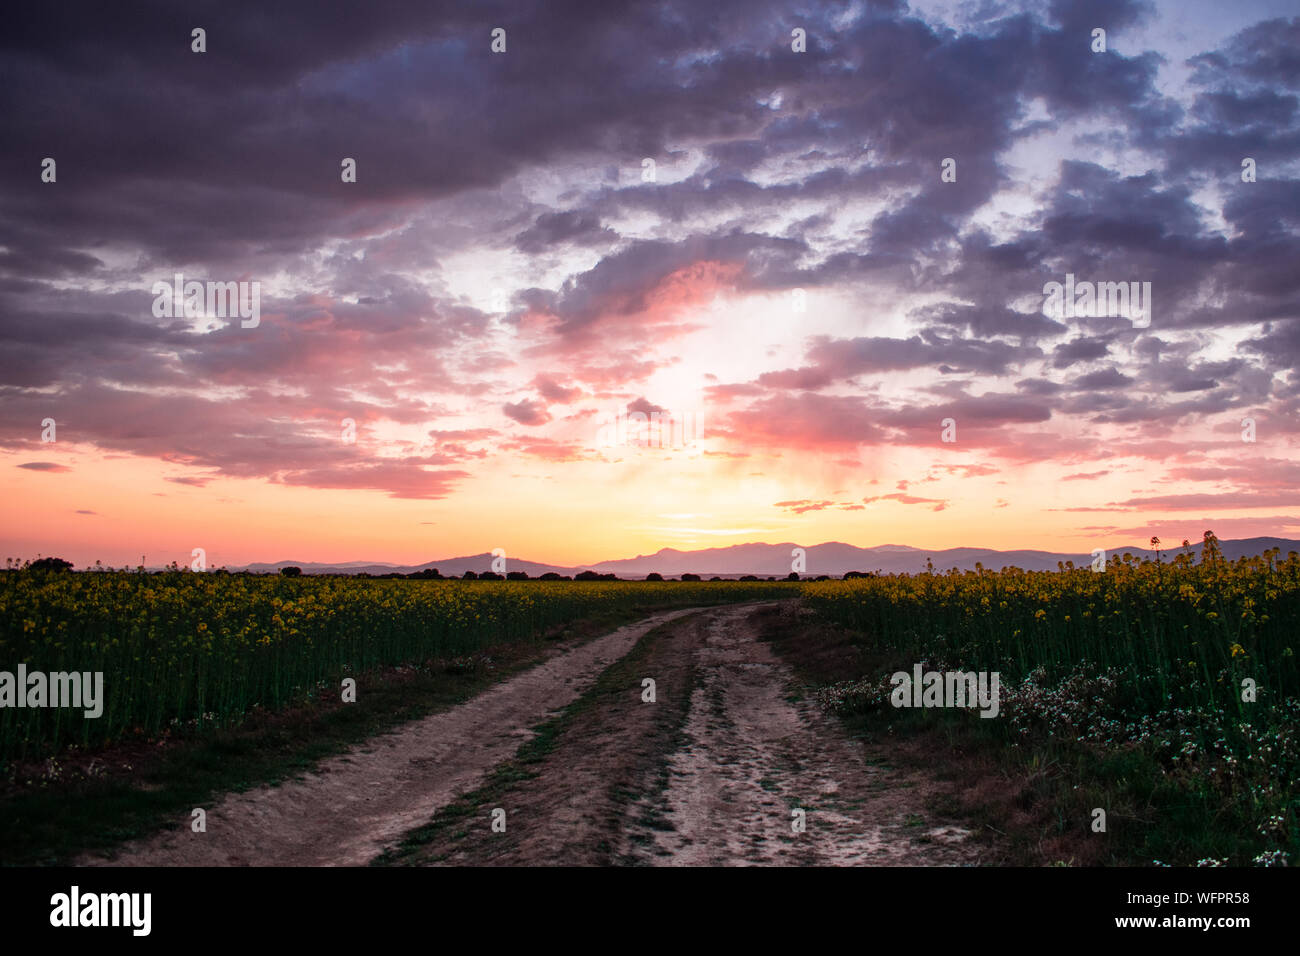 beautiful image of a rural road in a field of daisies with a beautiful sunset Stock Photo